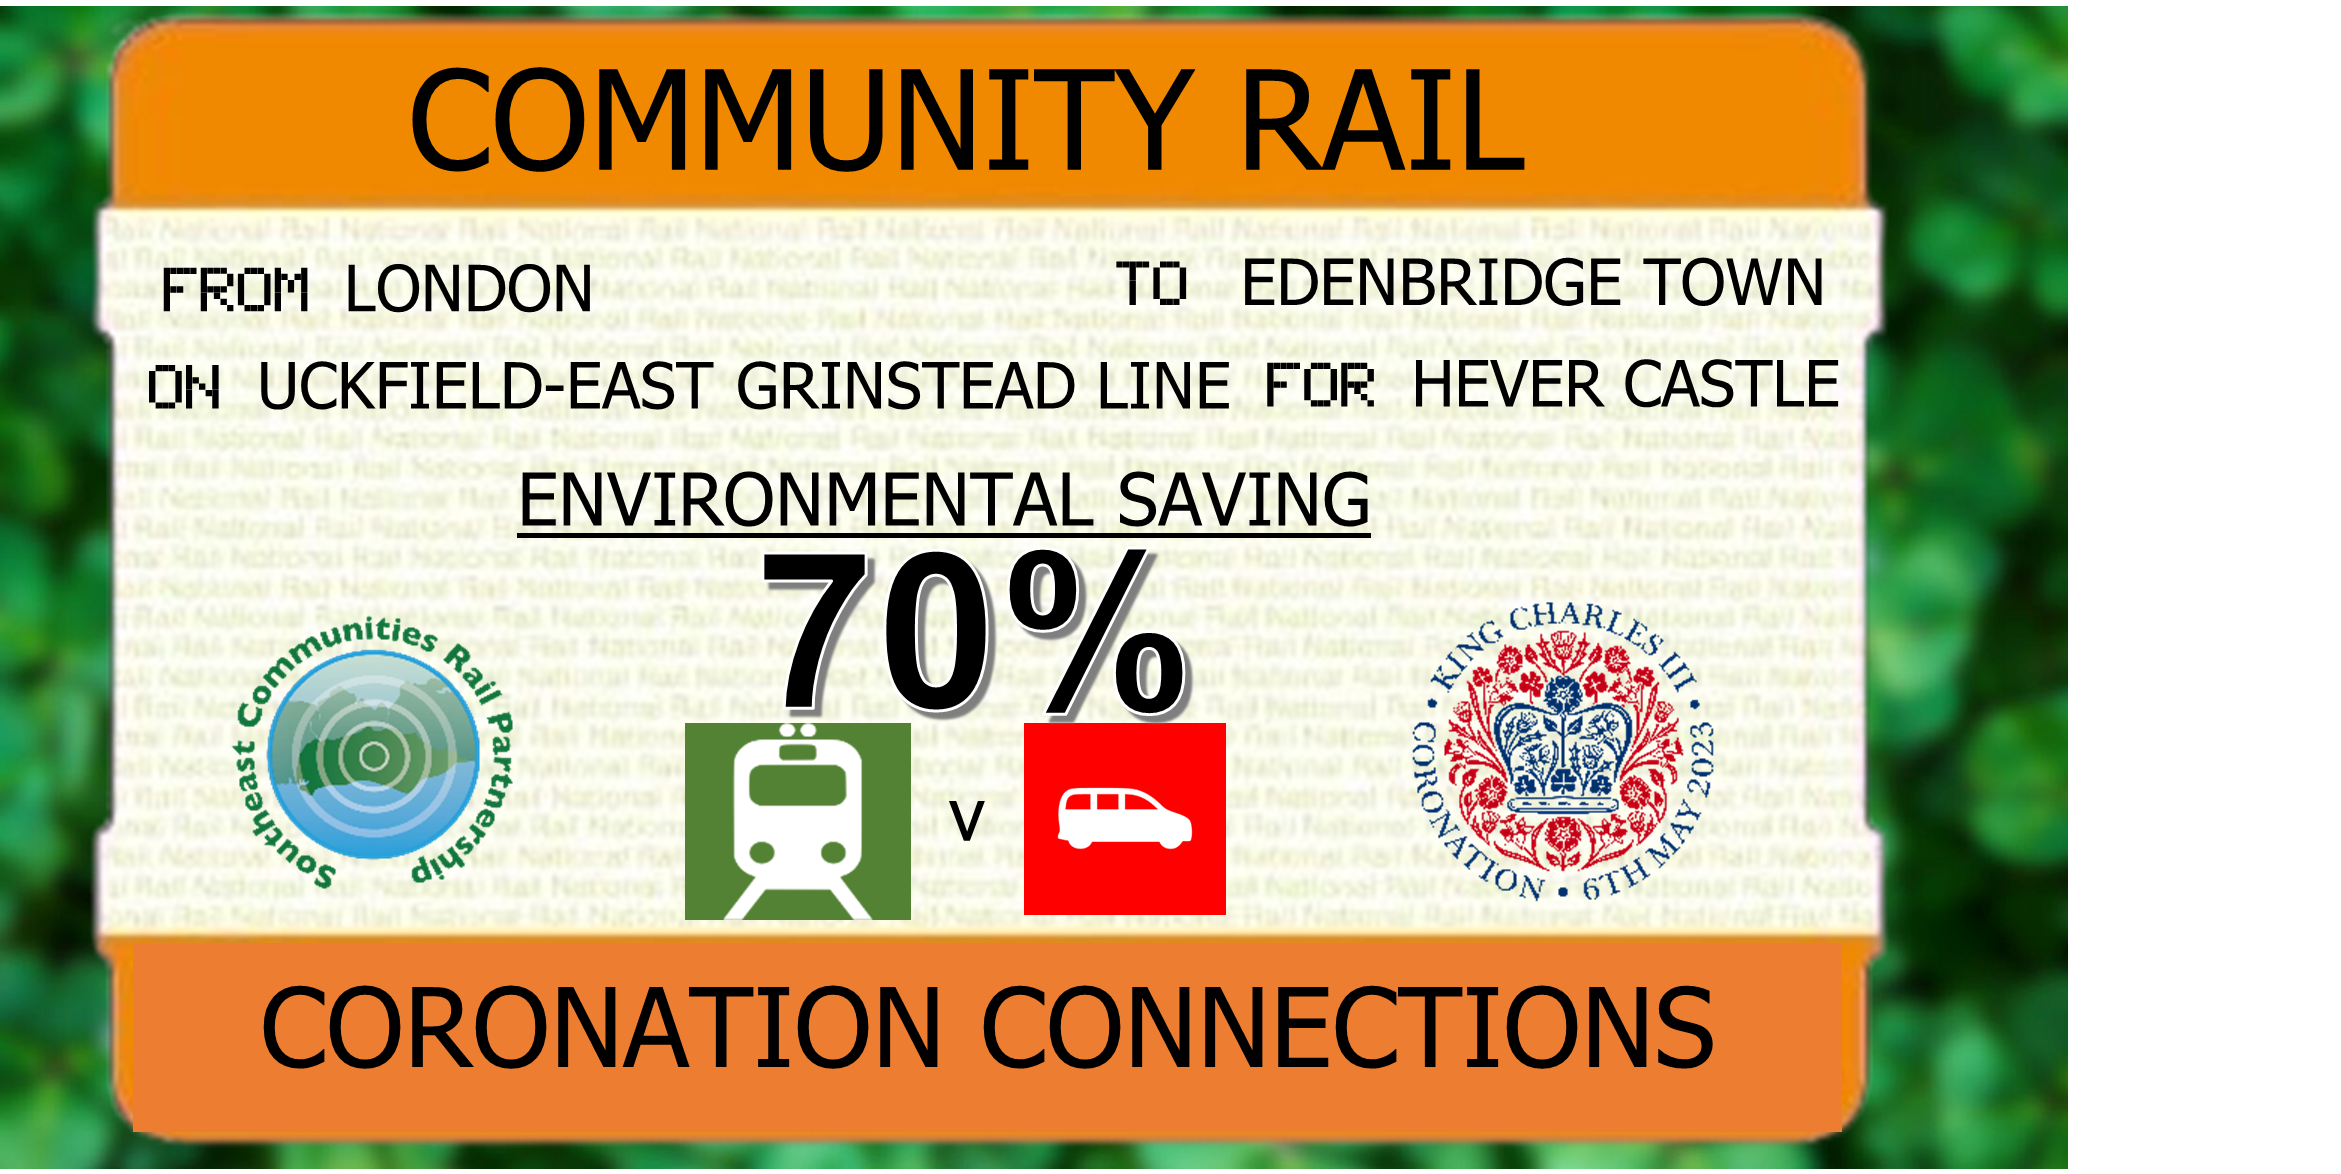 Mock train ticket showing environmental saving of 70% in greenhouse gas emissions from taking the train rather than driving a car from central London to Edenbridge Town station to visit Hever Castle